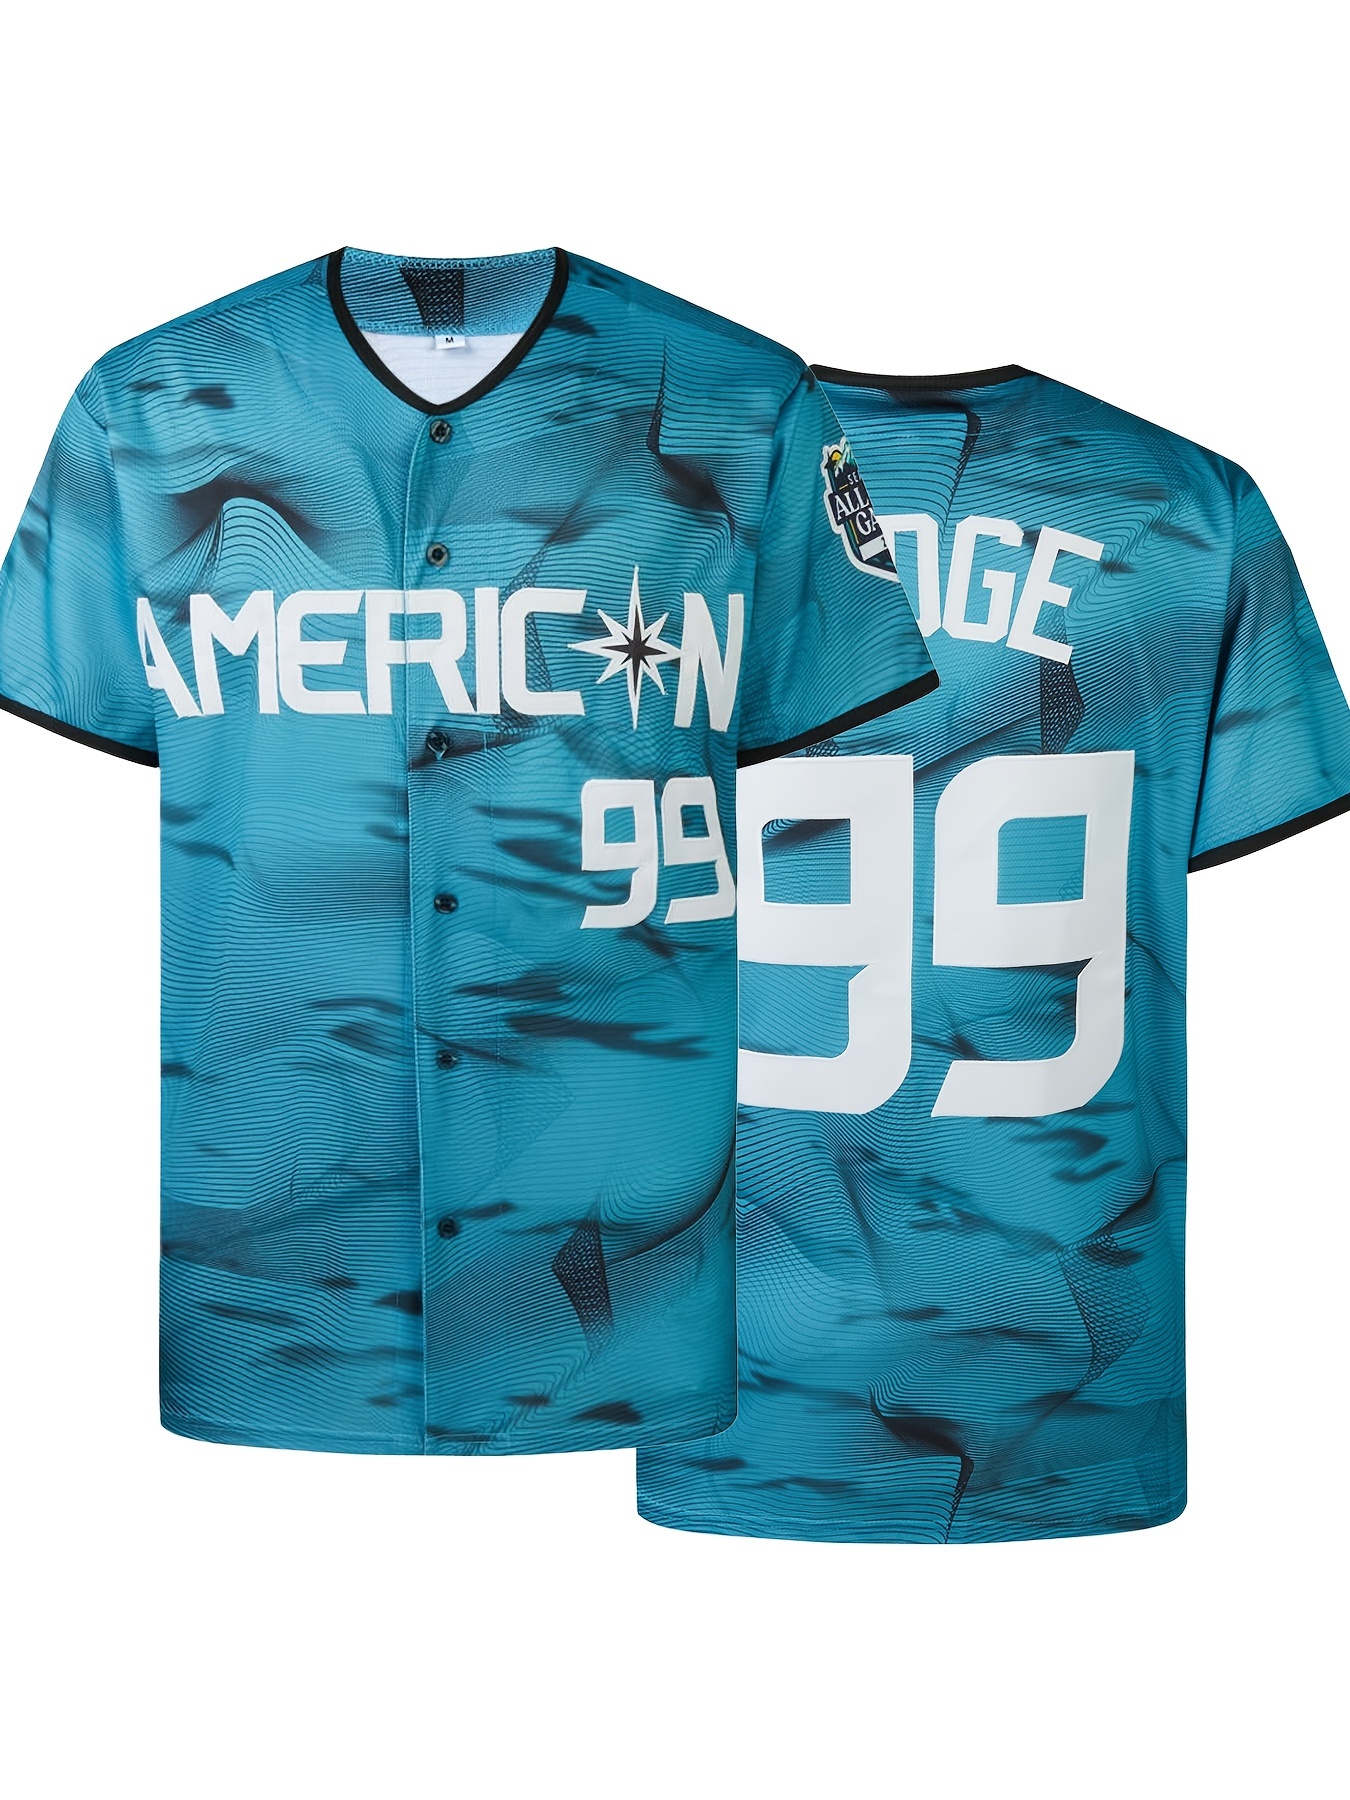 Classic Mariners jersey